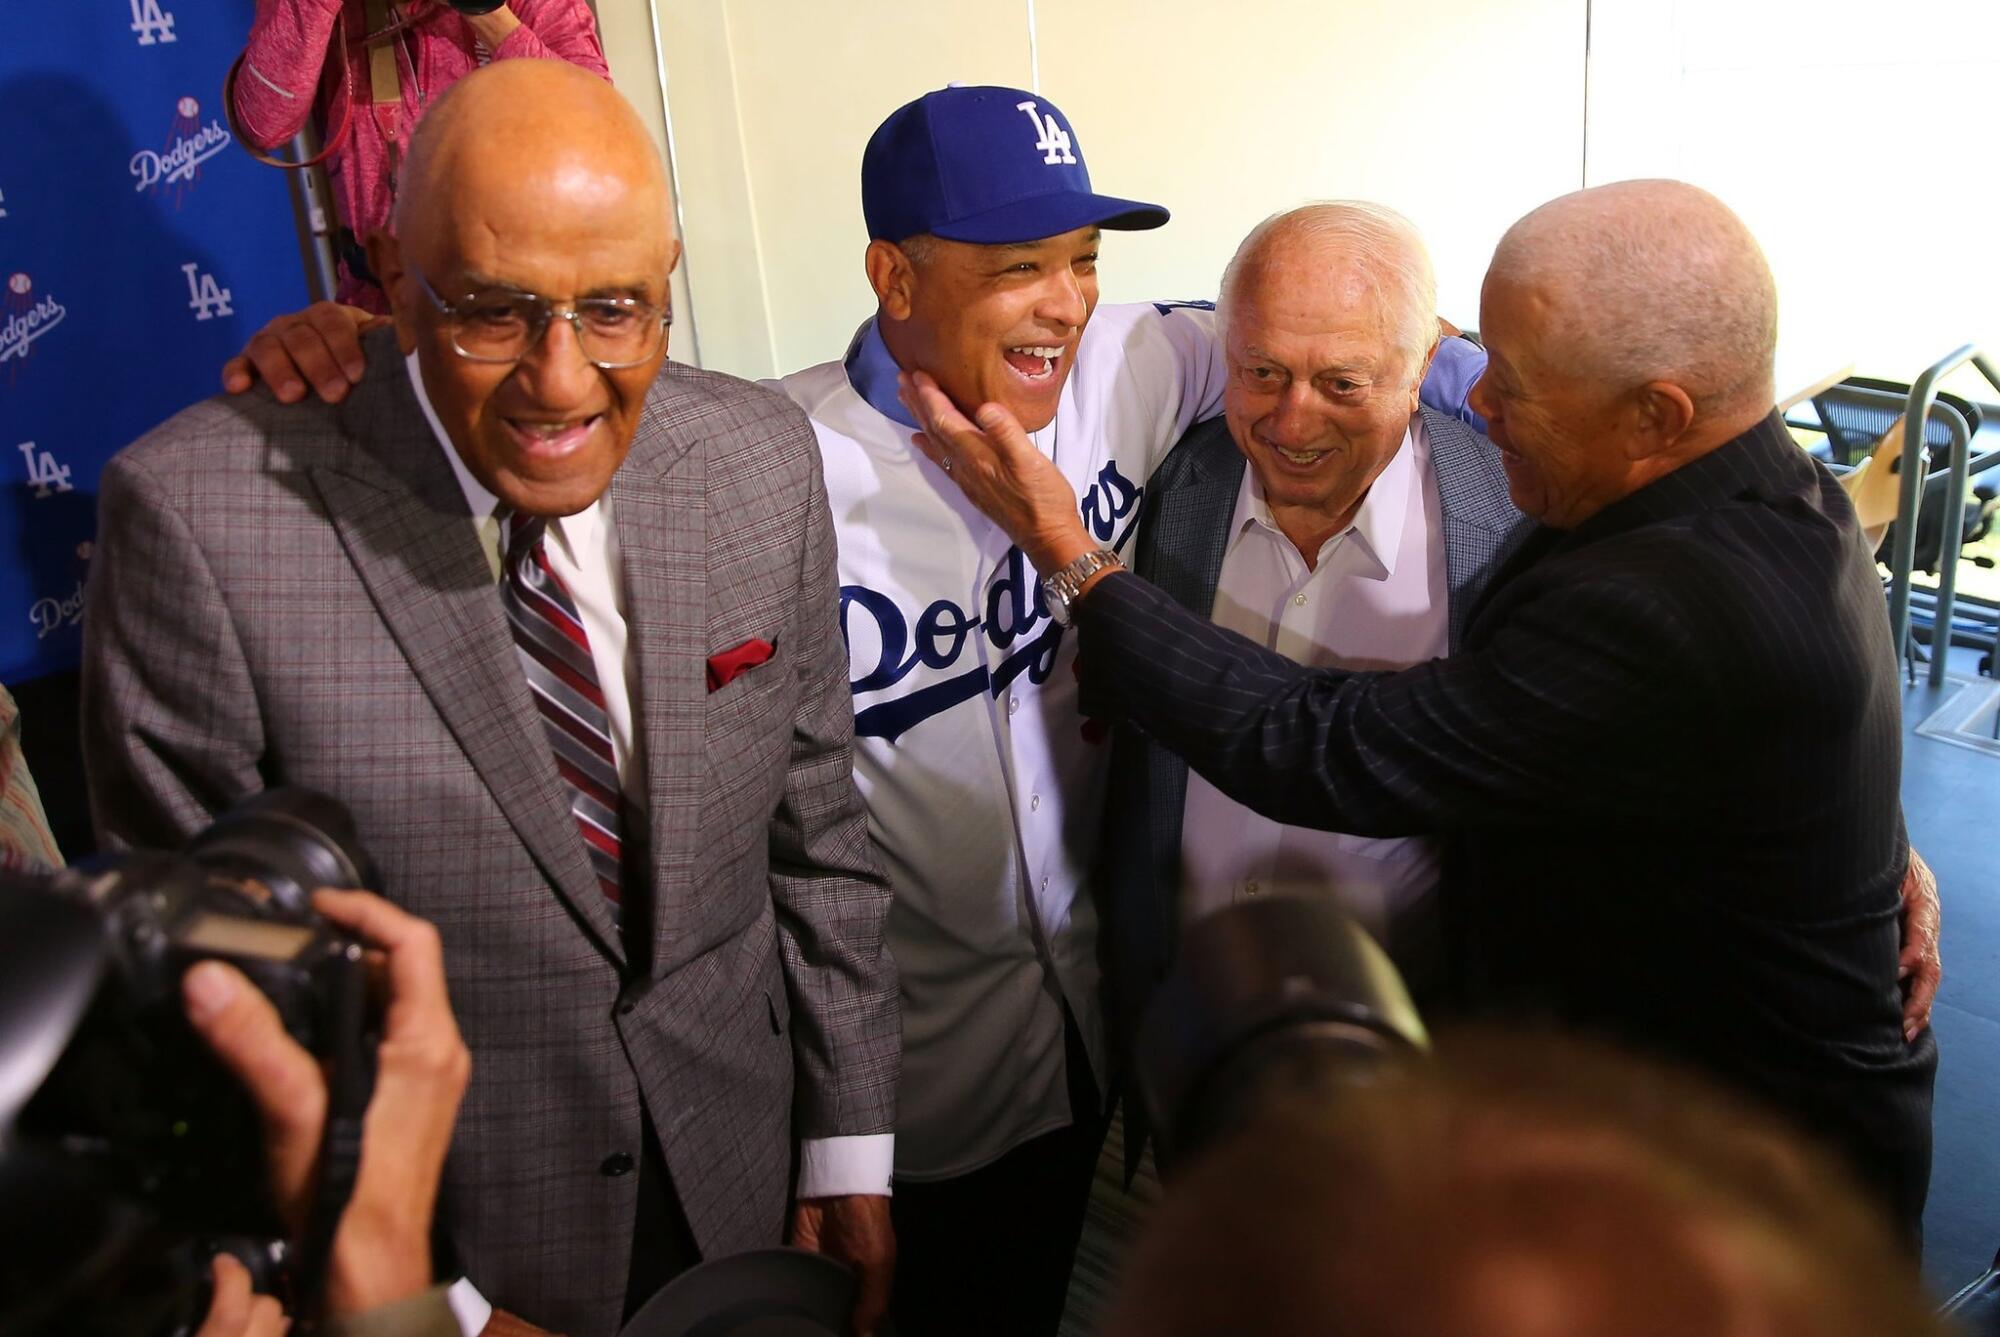 Don Newcombe, from left, Dave Roberts, Tommy Lasorda and Maury Wills at Dodger Stadium in 2016 